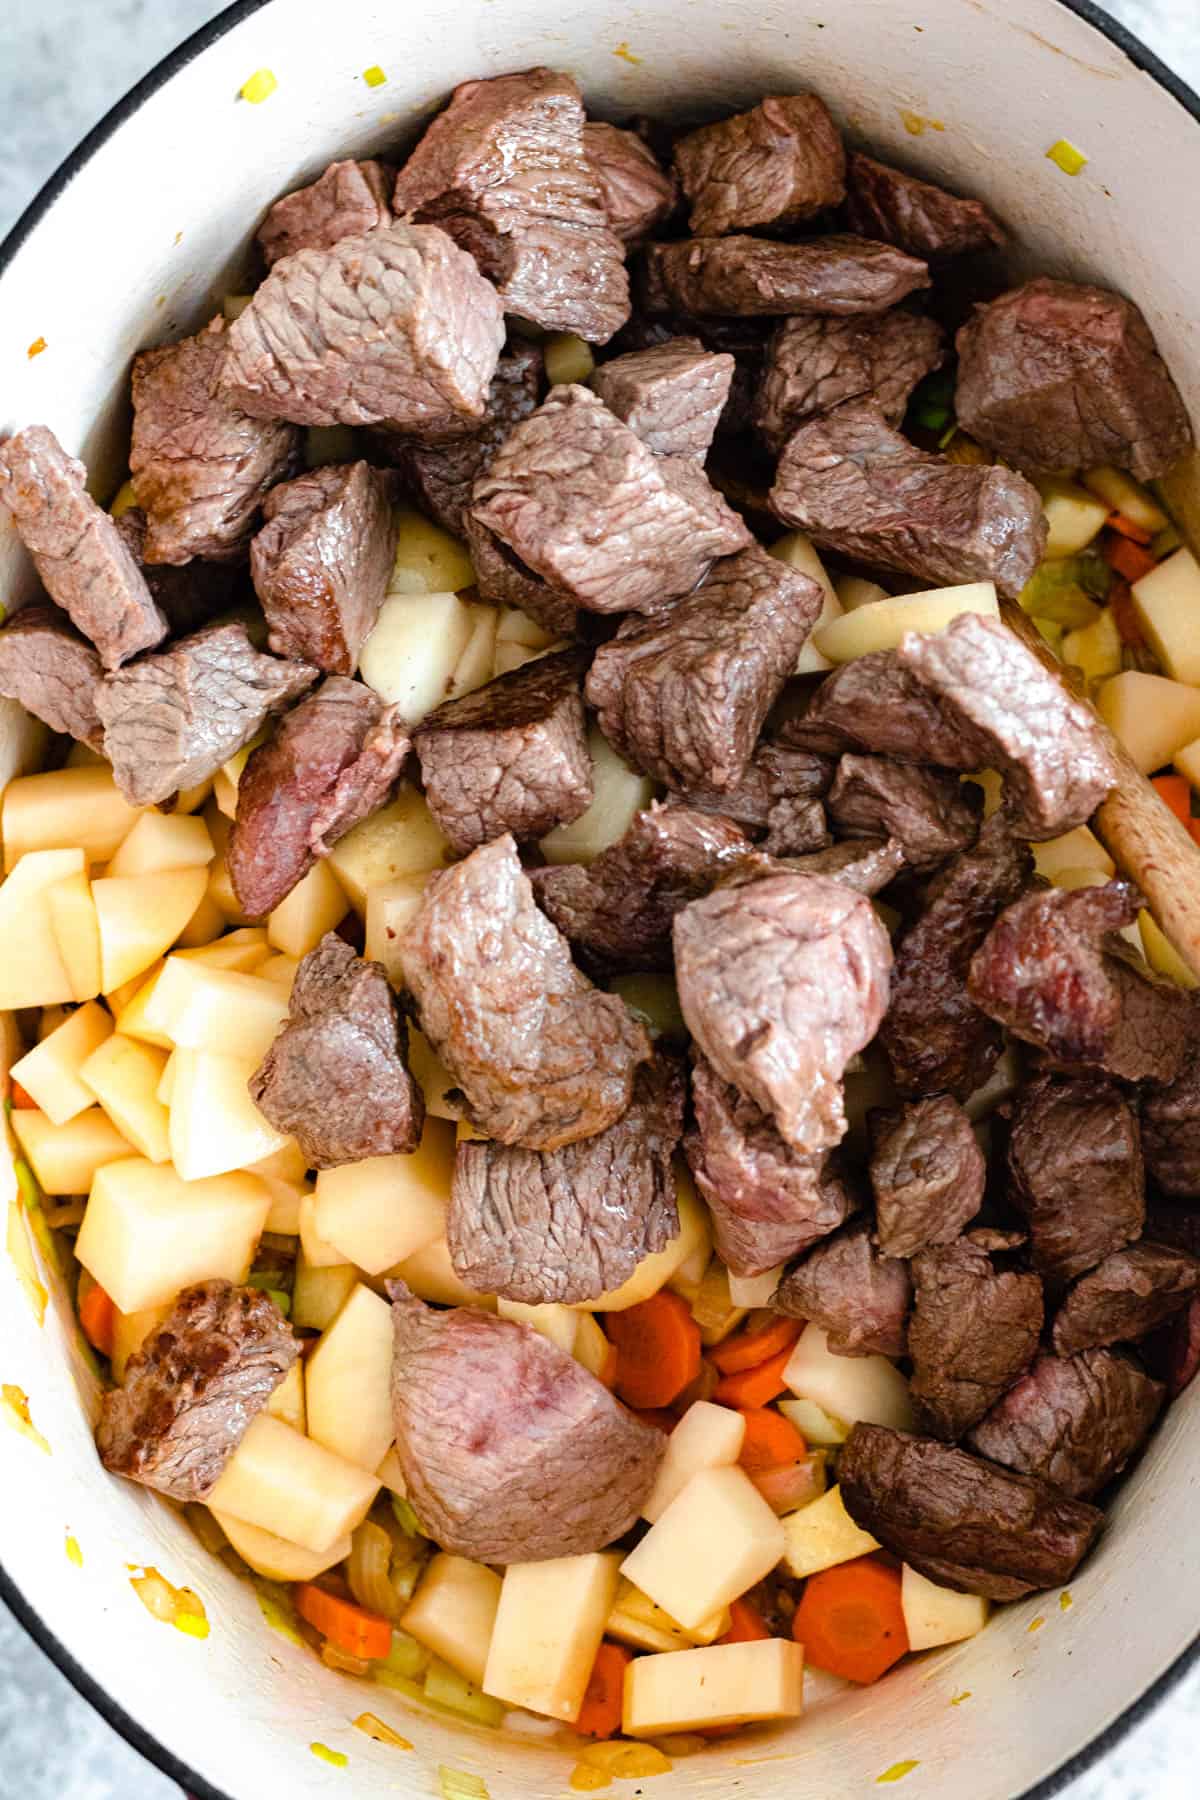 Potatoes, beef stew meat and veggies combined in a Dutch oven to prepare Irish stew recipe. 